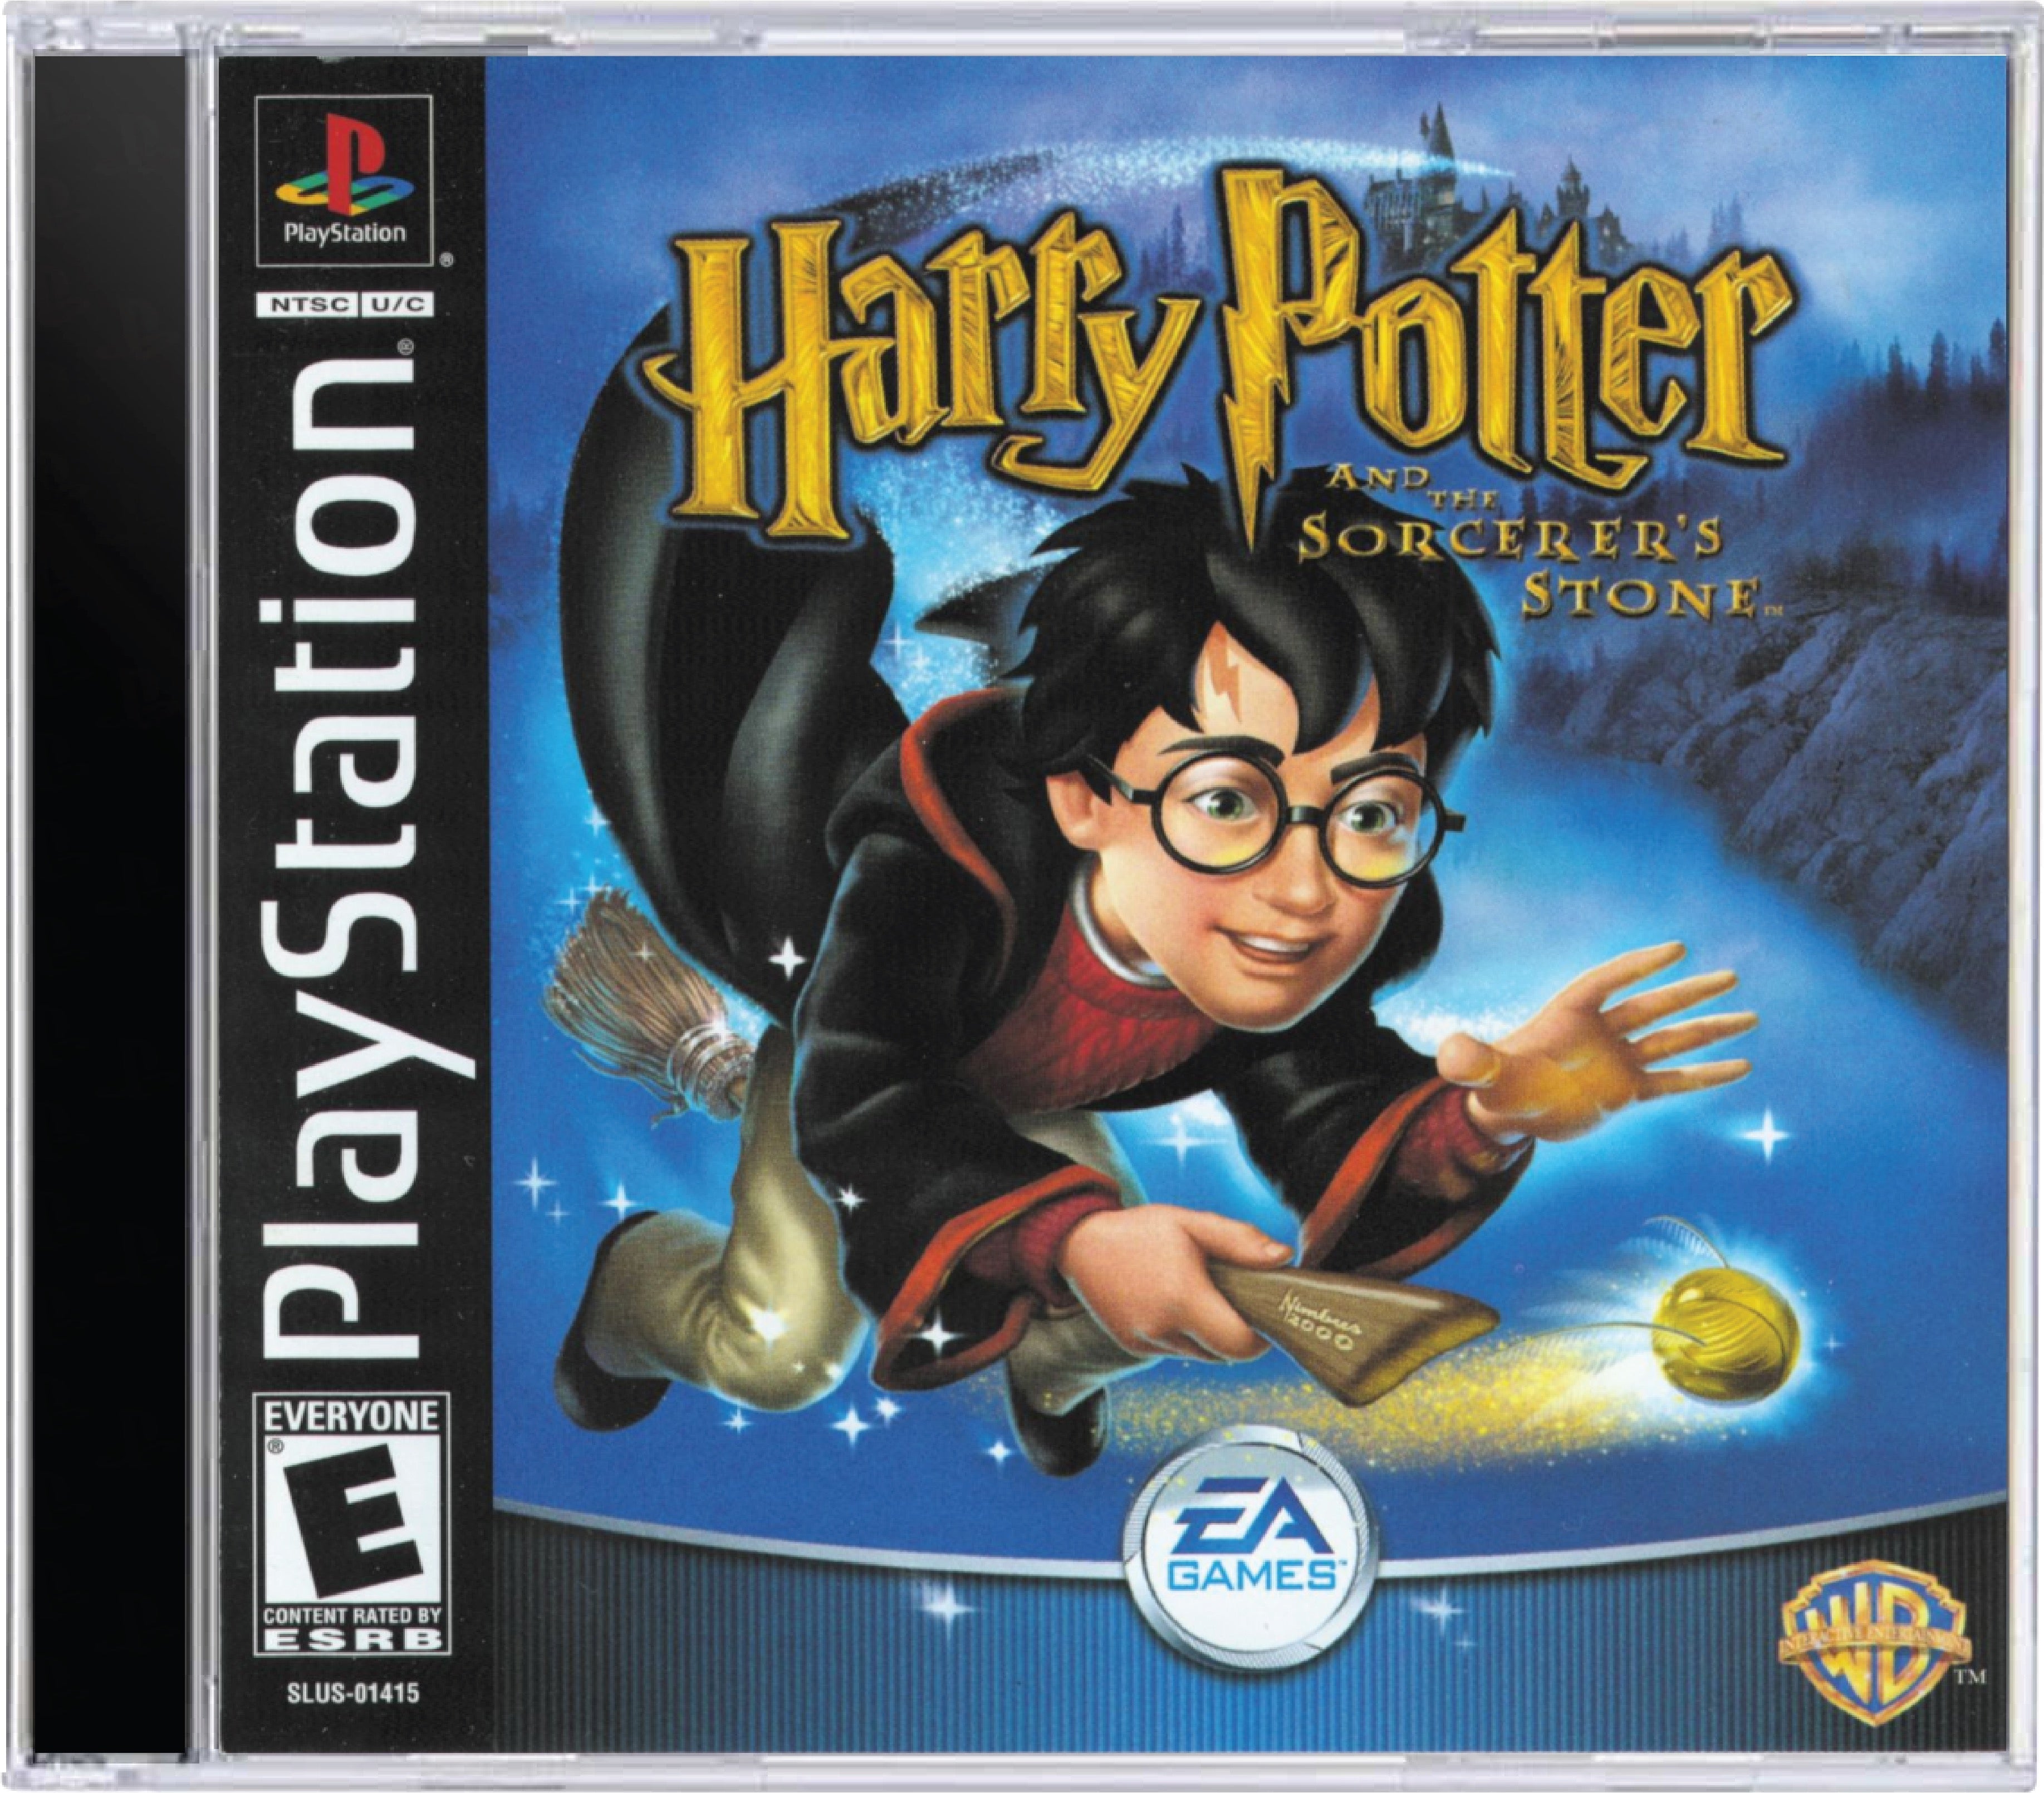 Harry Potter and the Sorcerer's Stone Cover Art and Product Photo